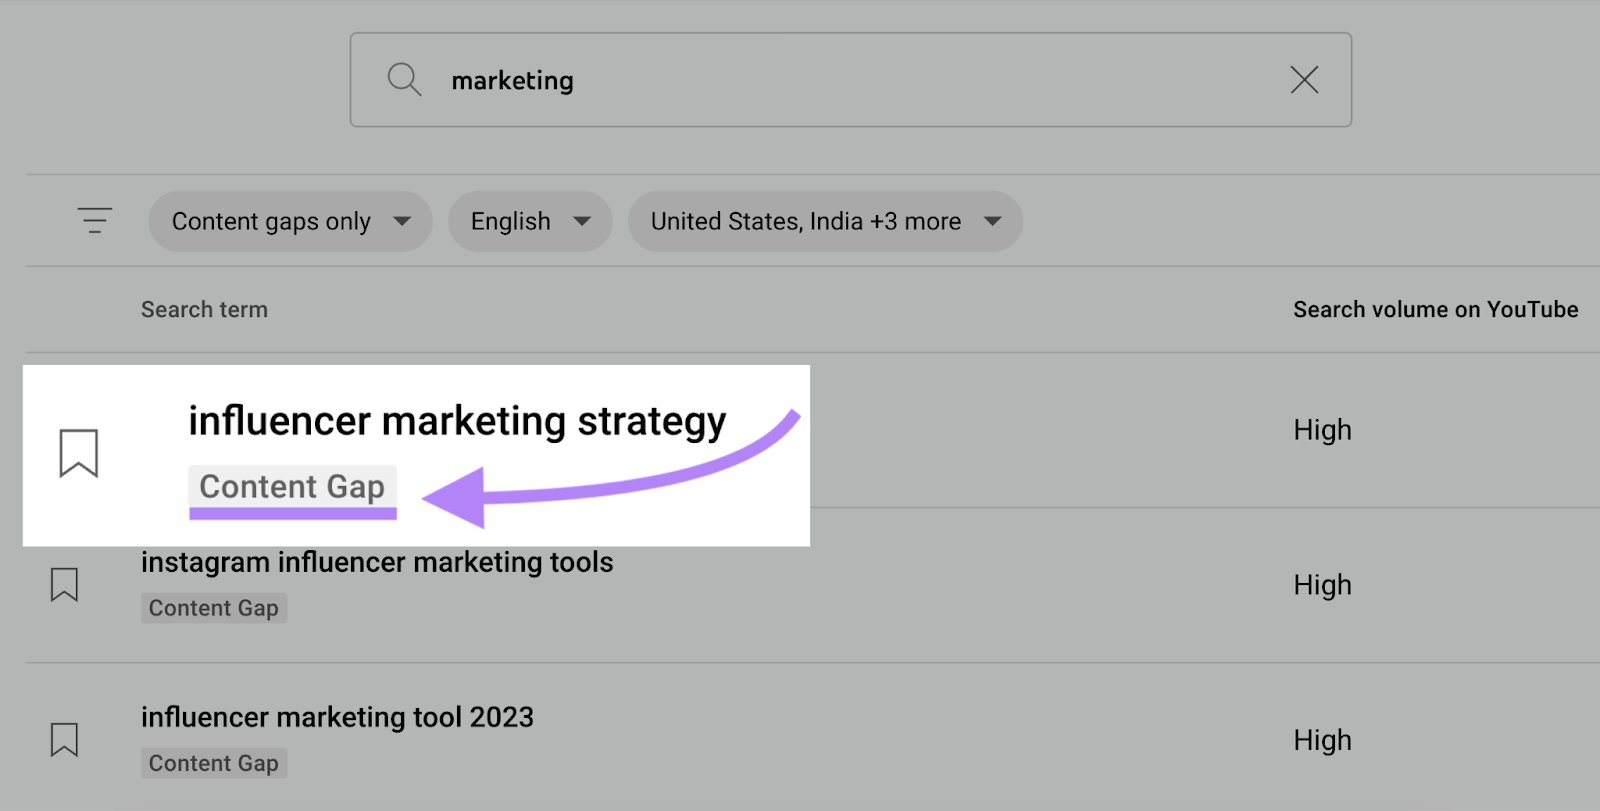 "influencer marketing strategy" search term marked with the “Content Gap” tag